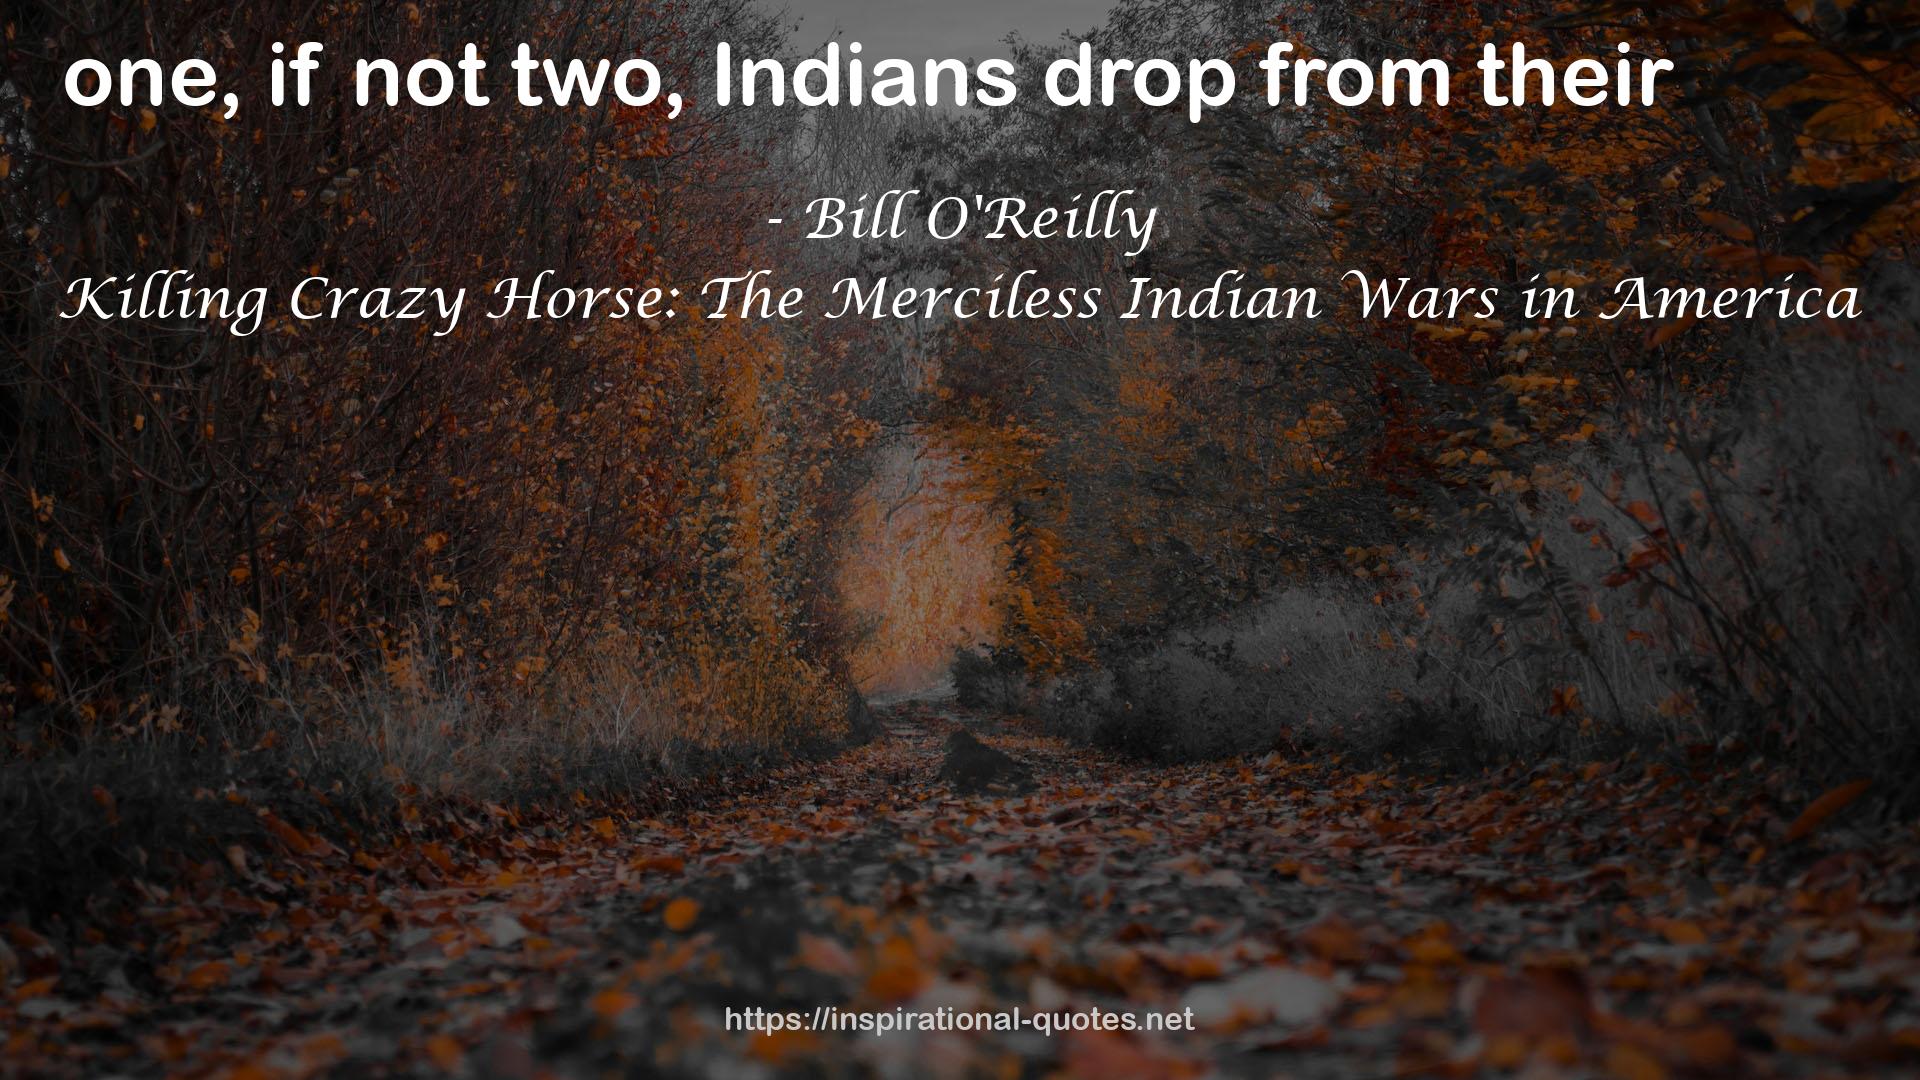 Killing Crazy Horse: The Merciless Indian Wars in America QUOTES